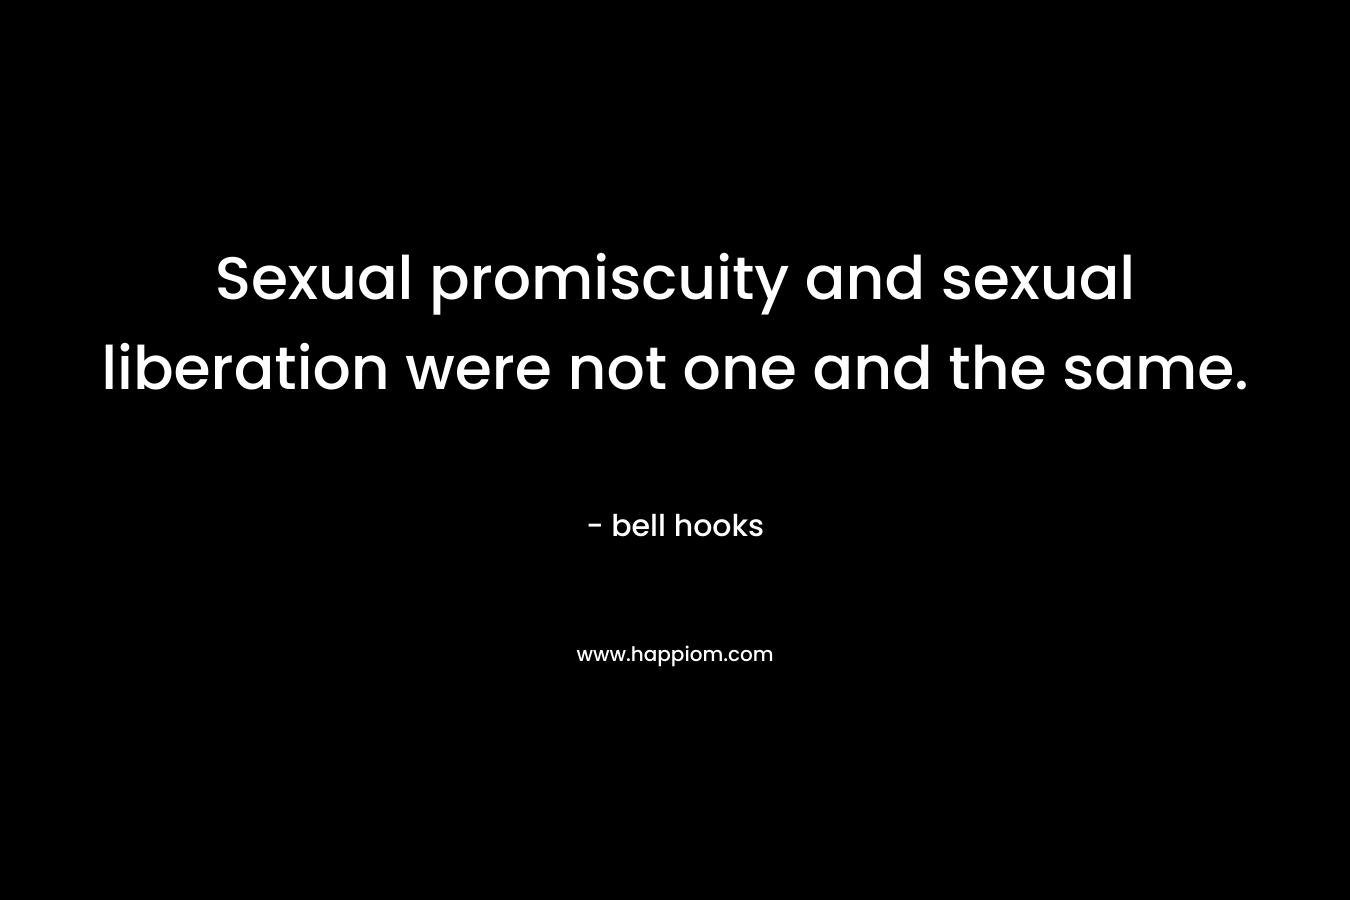 Sexual promiscuity and sexual liberation were not one and the same.